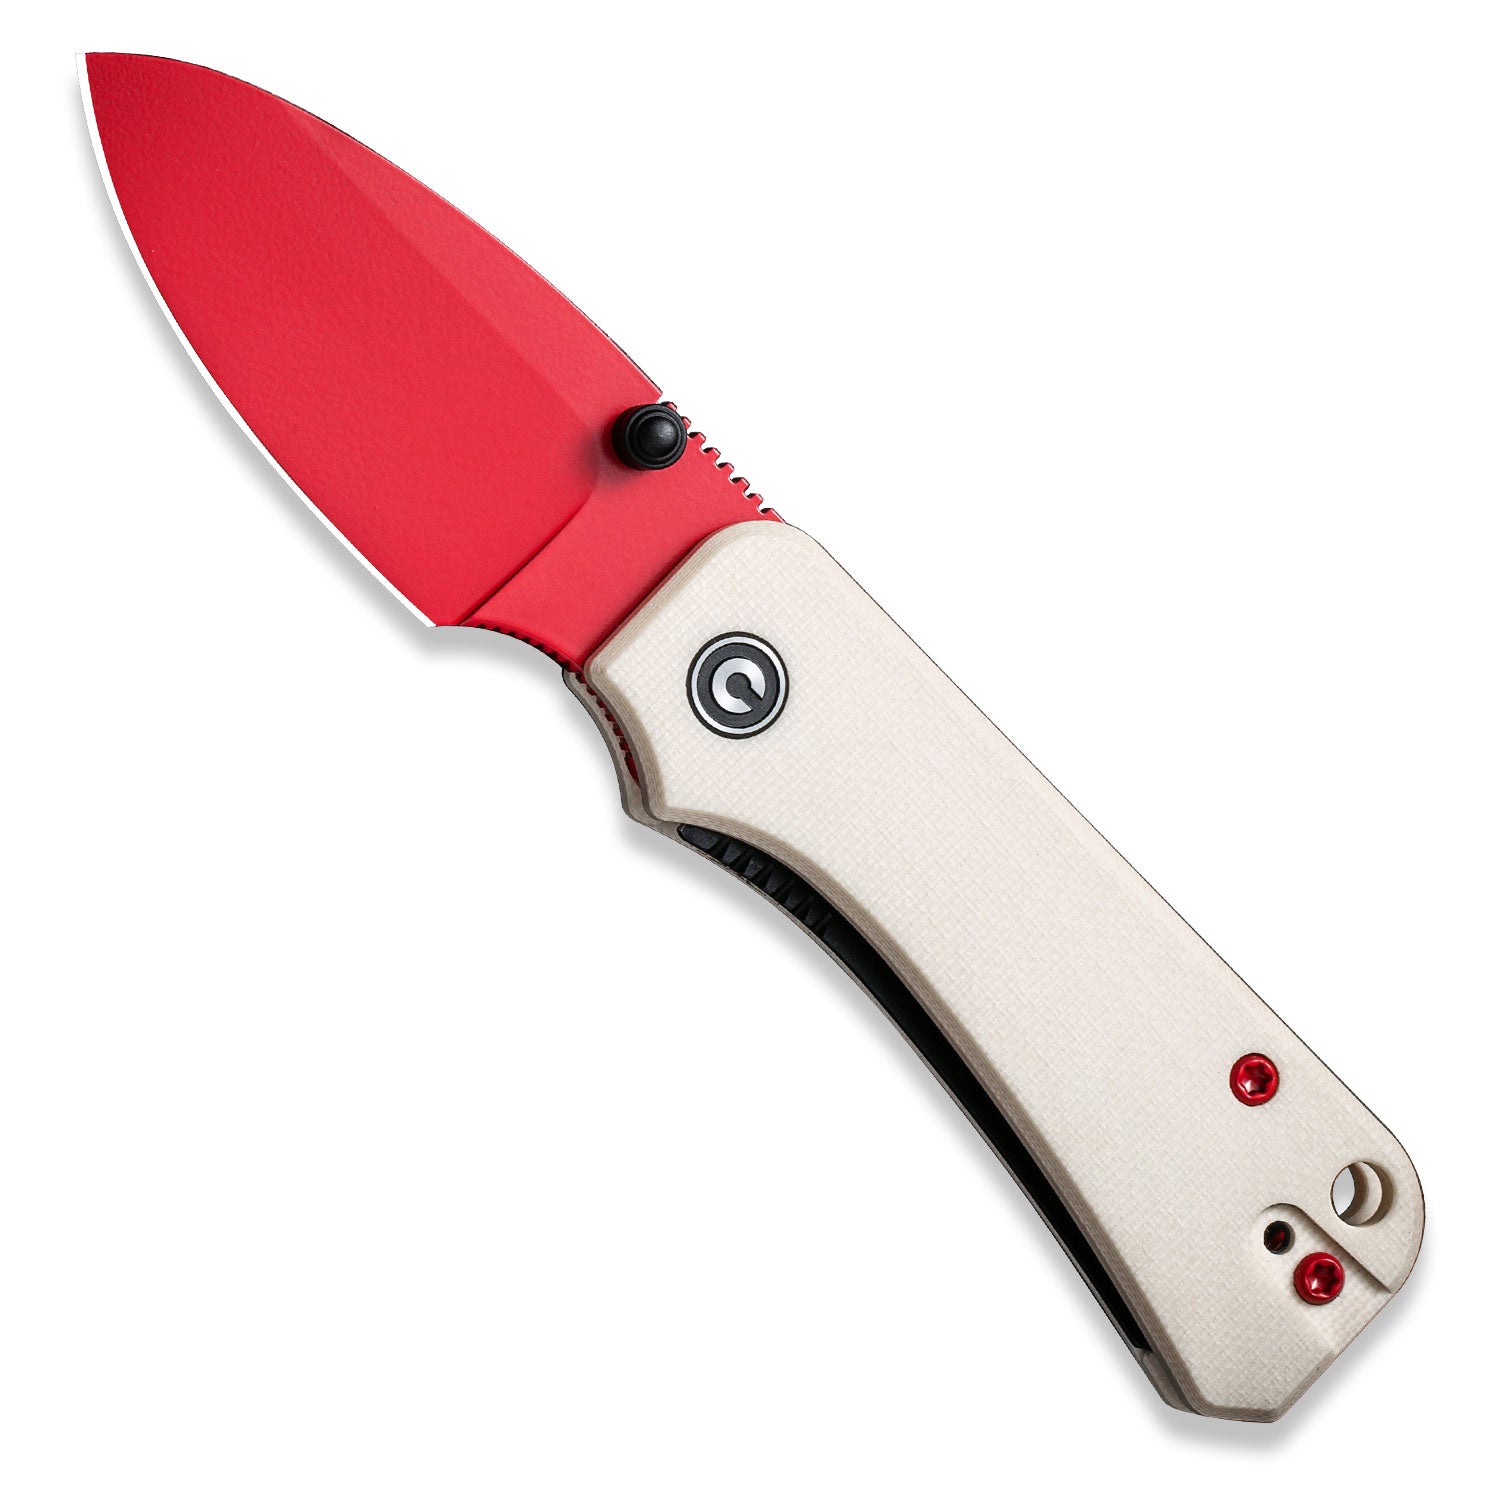 The Red Coat - Japanese Utility Knife – AD Baby Knives